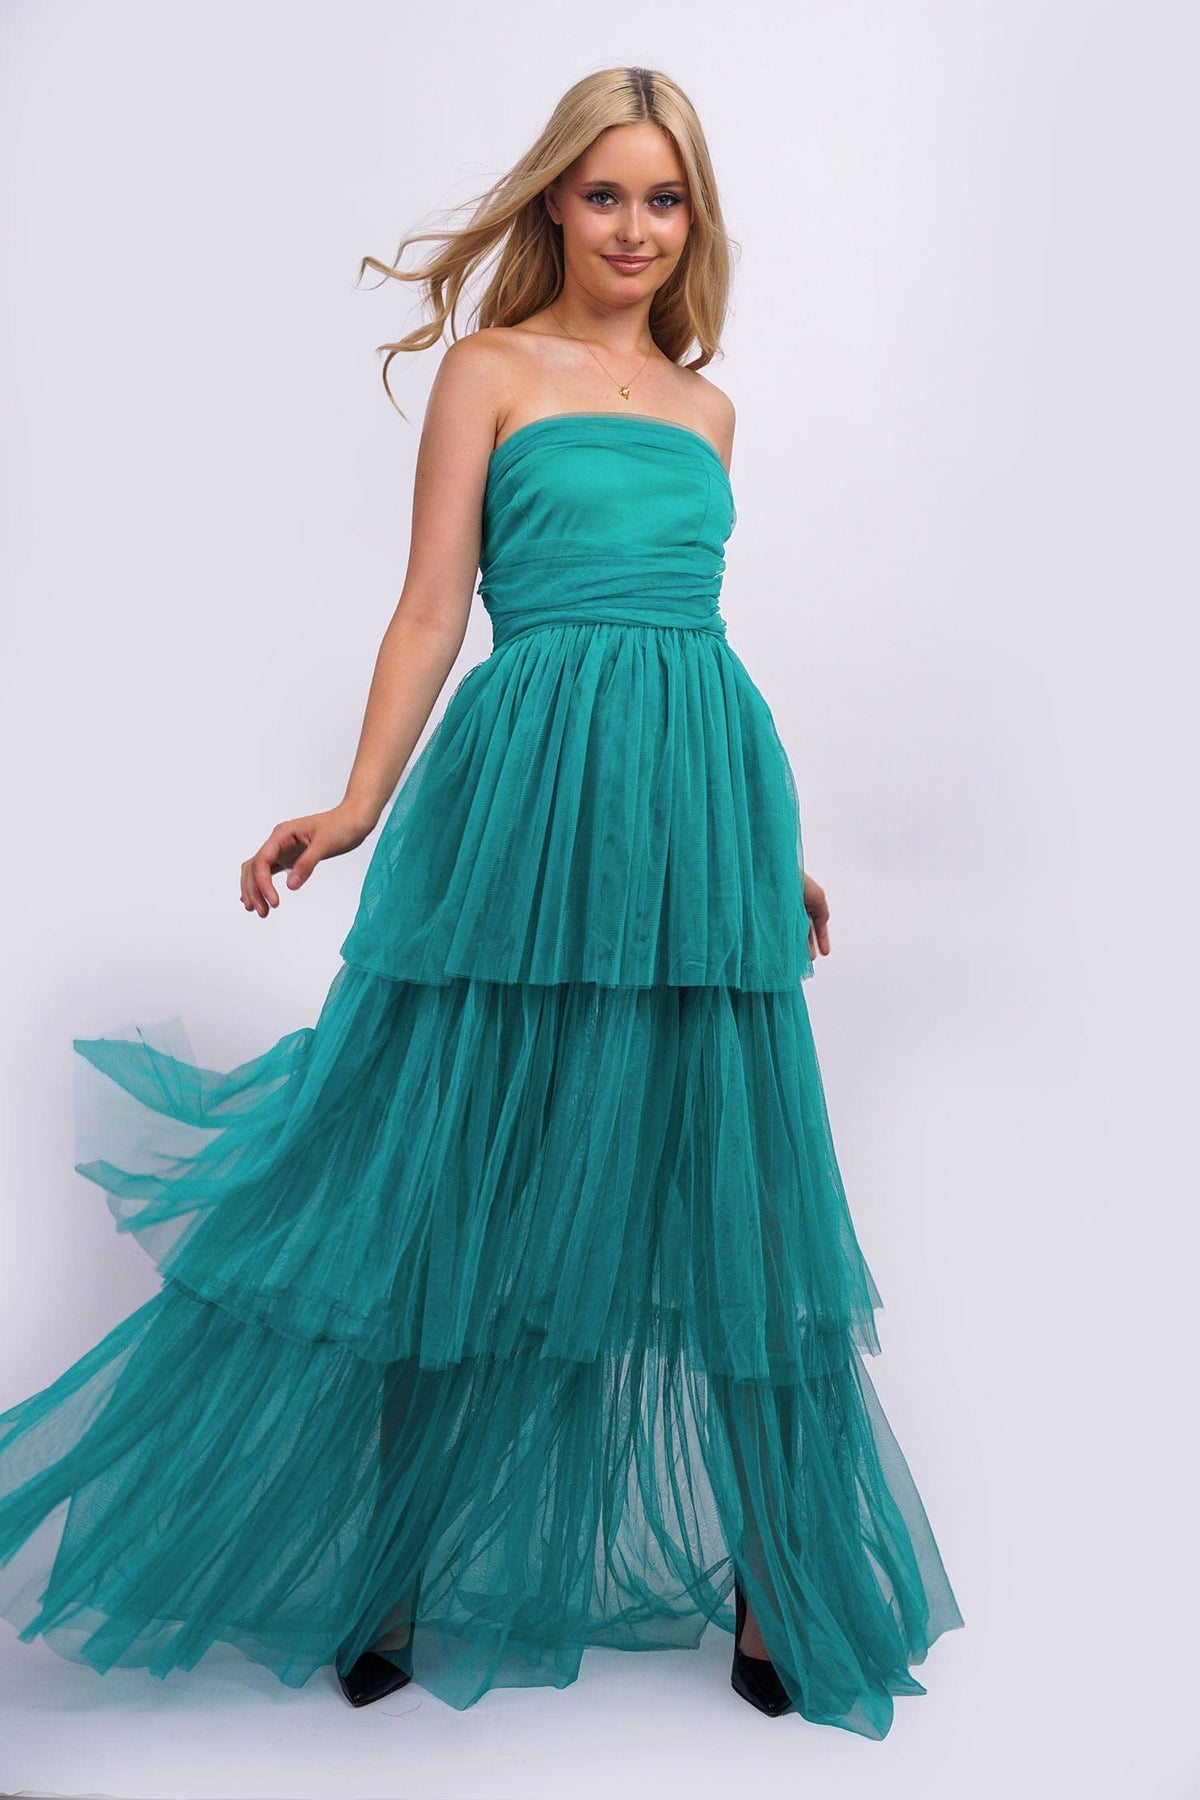 DCD GOWNS Aqua Strapless Tulle Tiers Gown